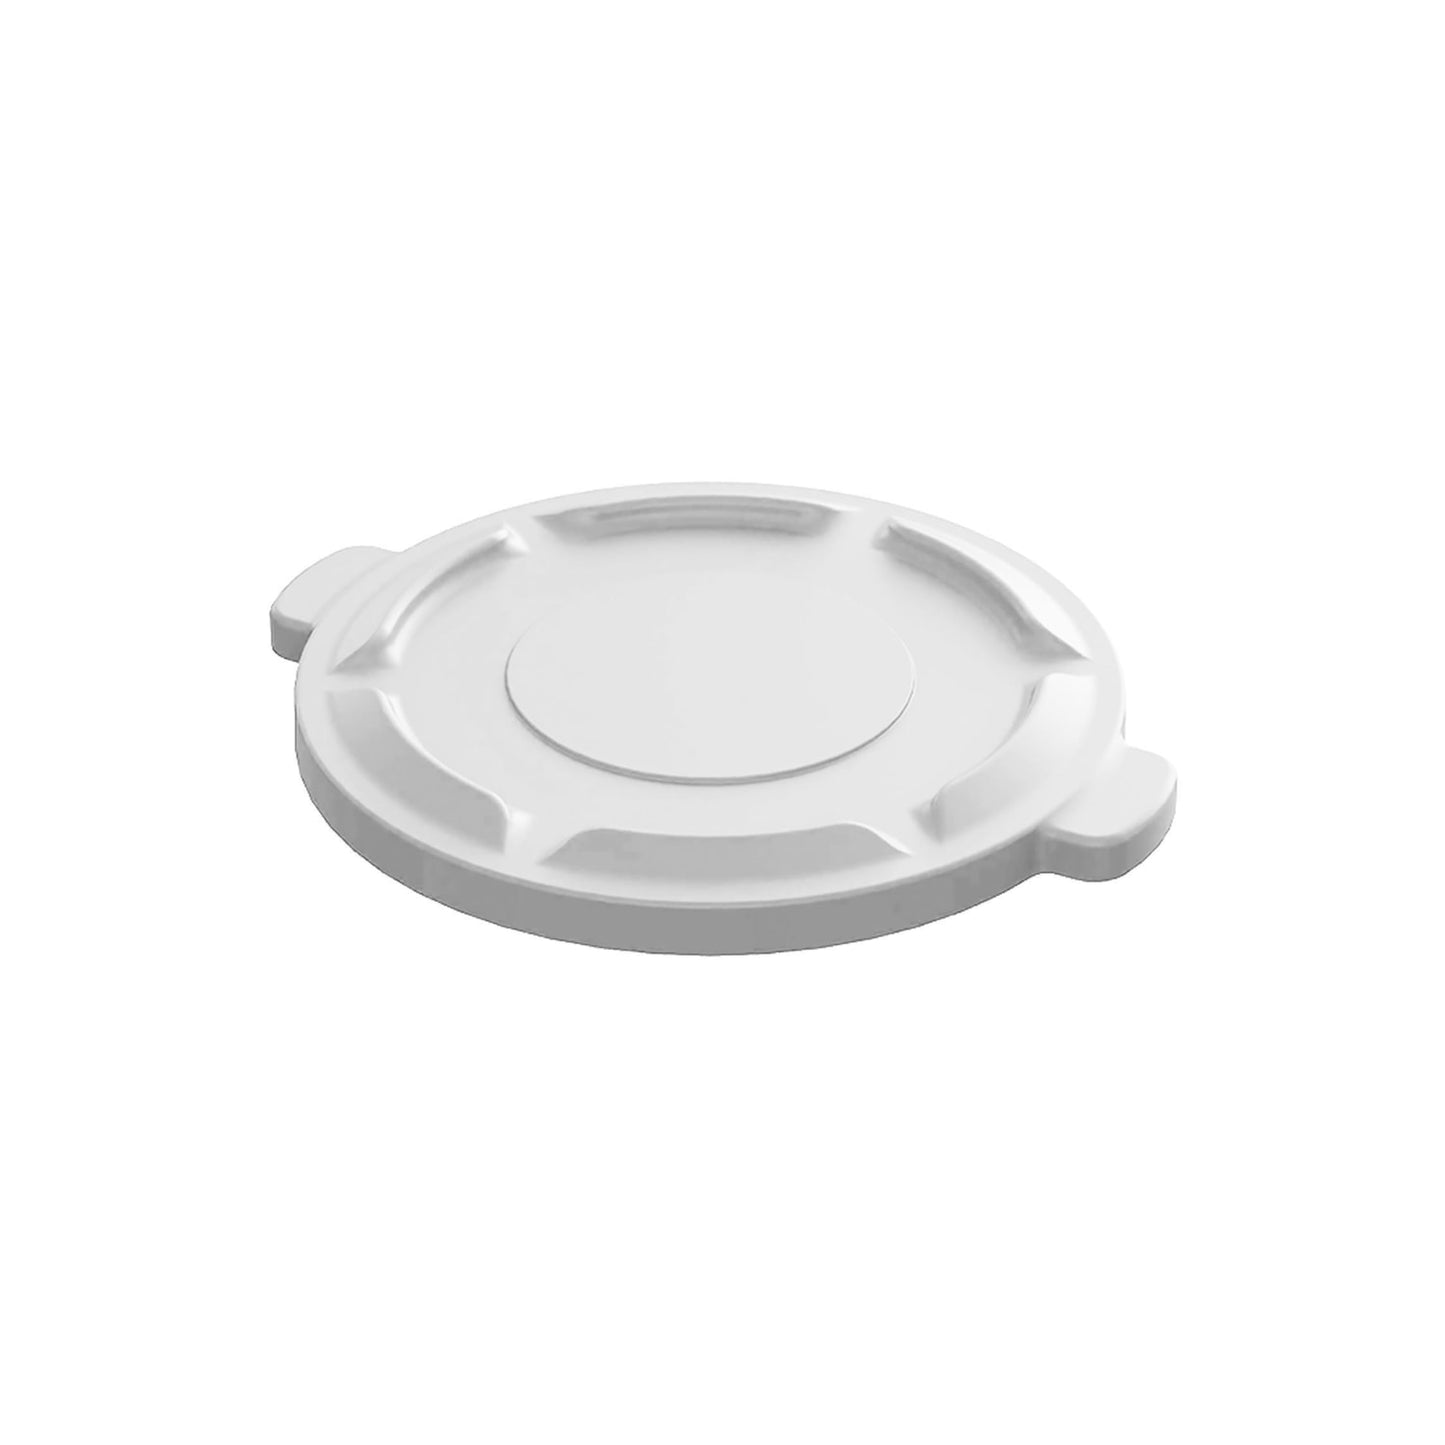 32 gal Container Lid White - 9633W